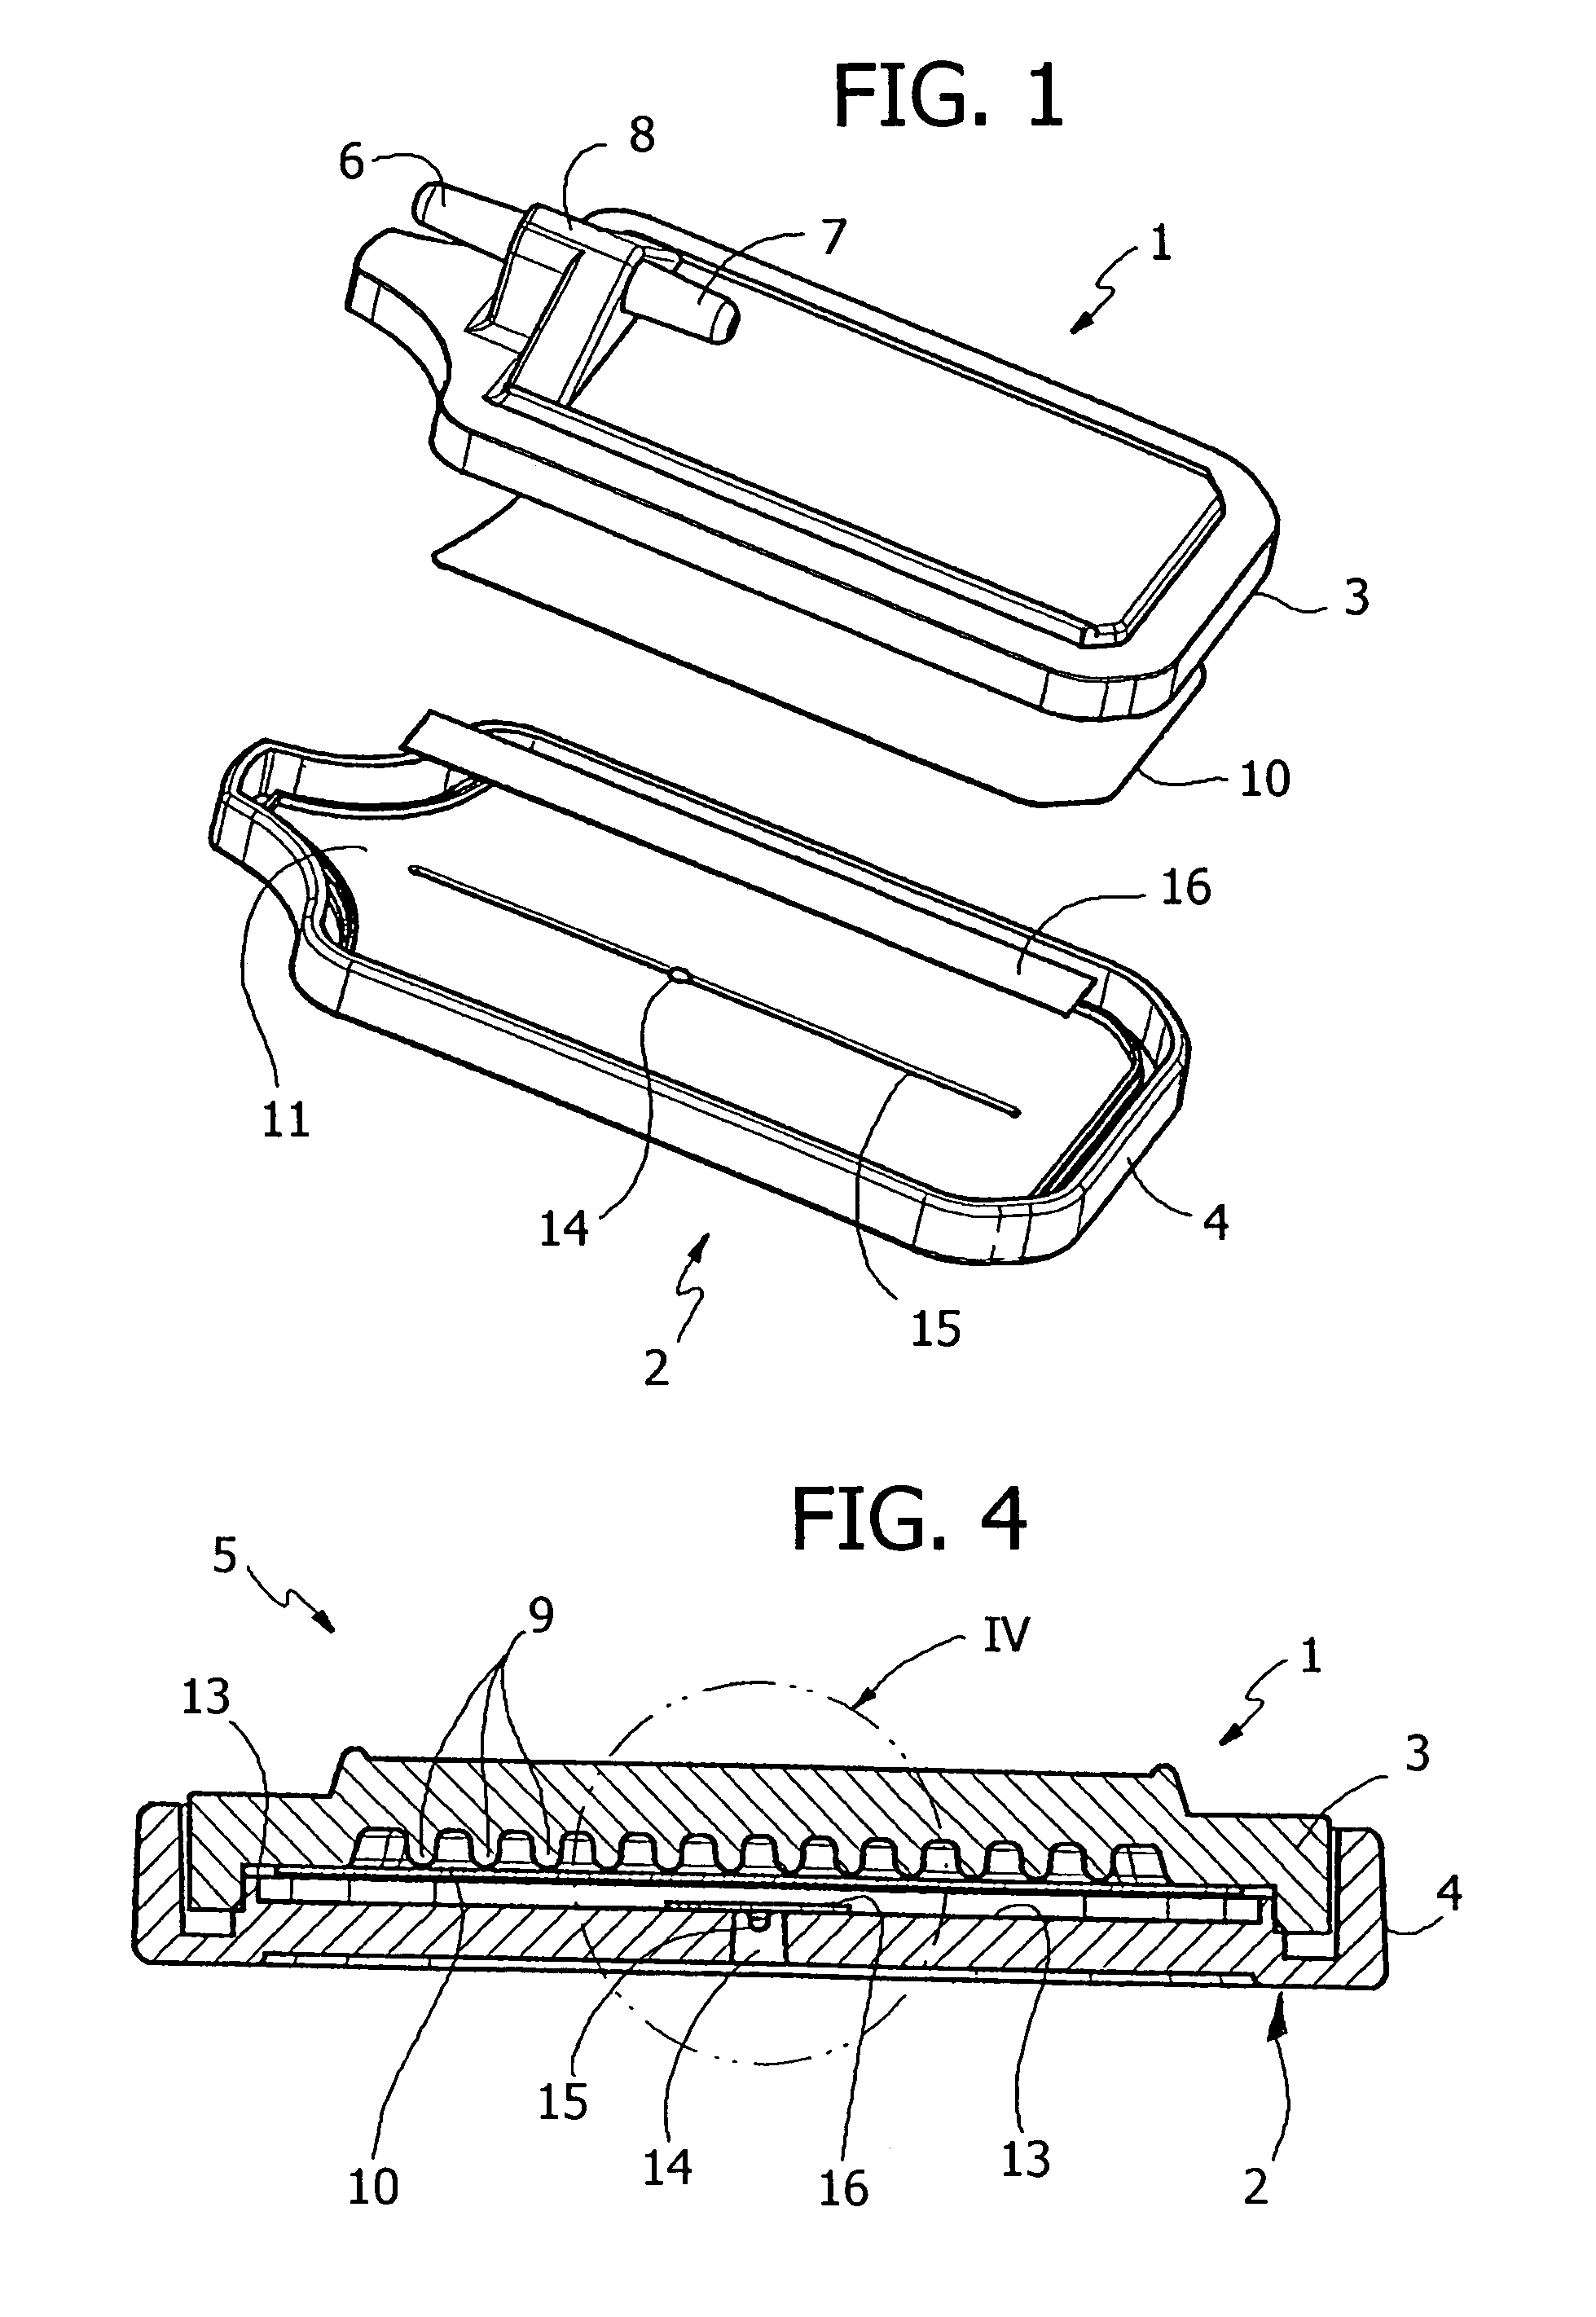 Flat filter for venting gas in intravenous medical lines